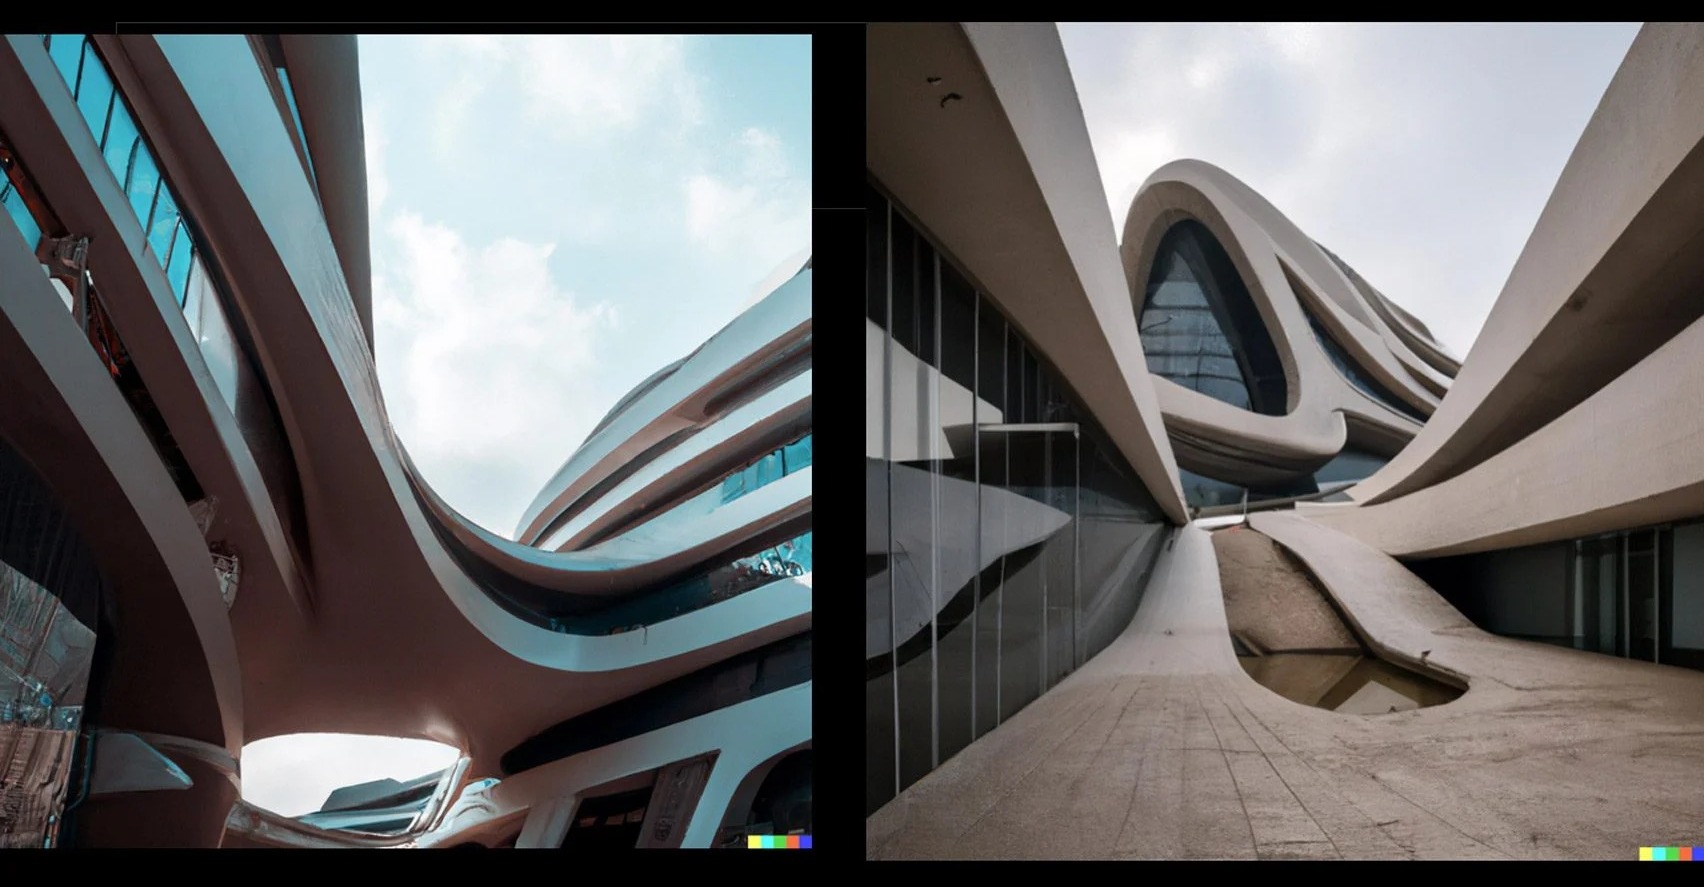 Zaha Hadid Architects is using AI text-to-image generators like DALL-E 2 and Midjourney to come up with design ideas for projects